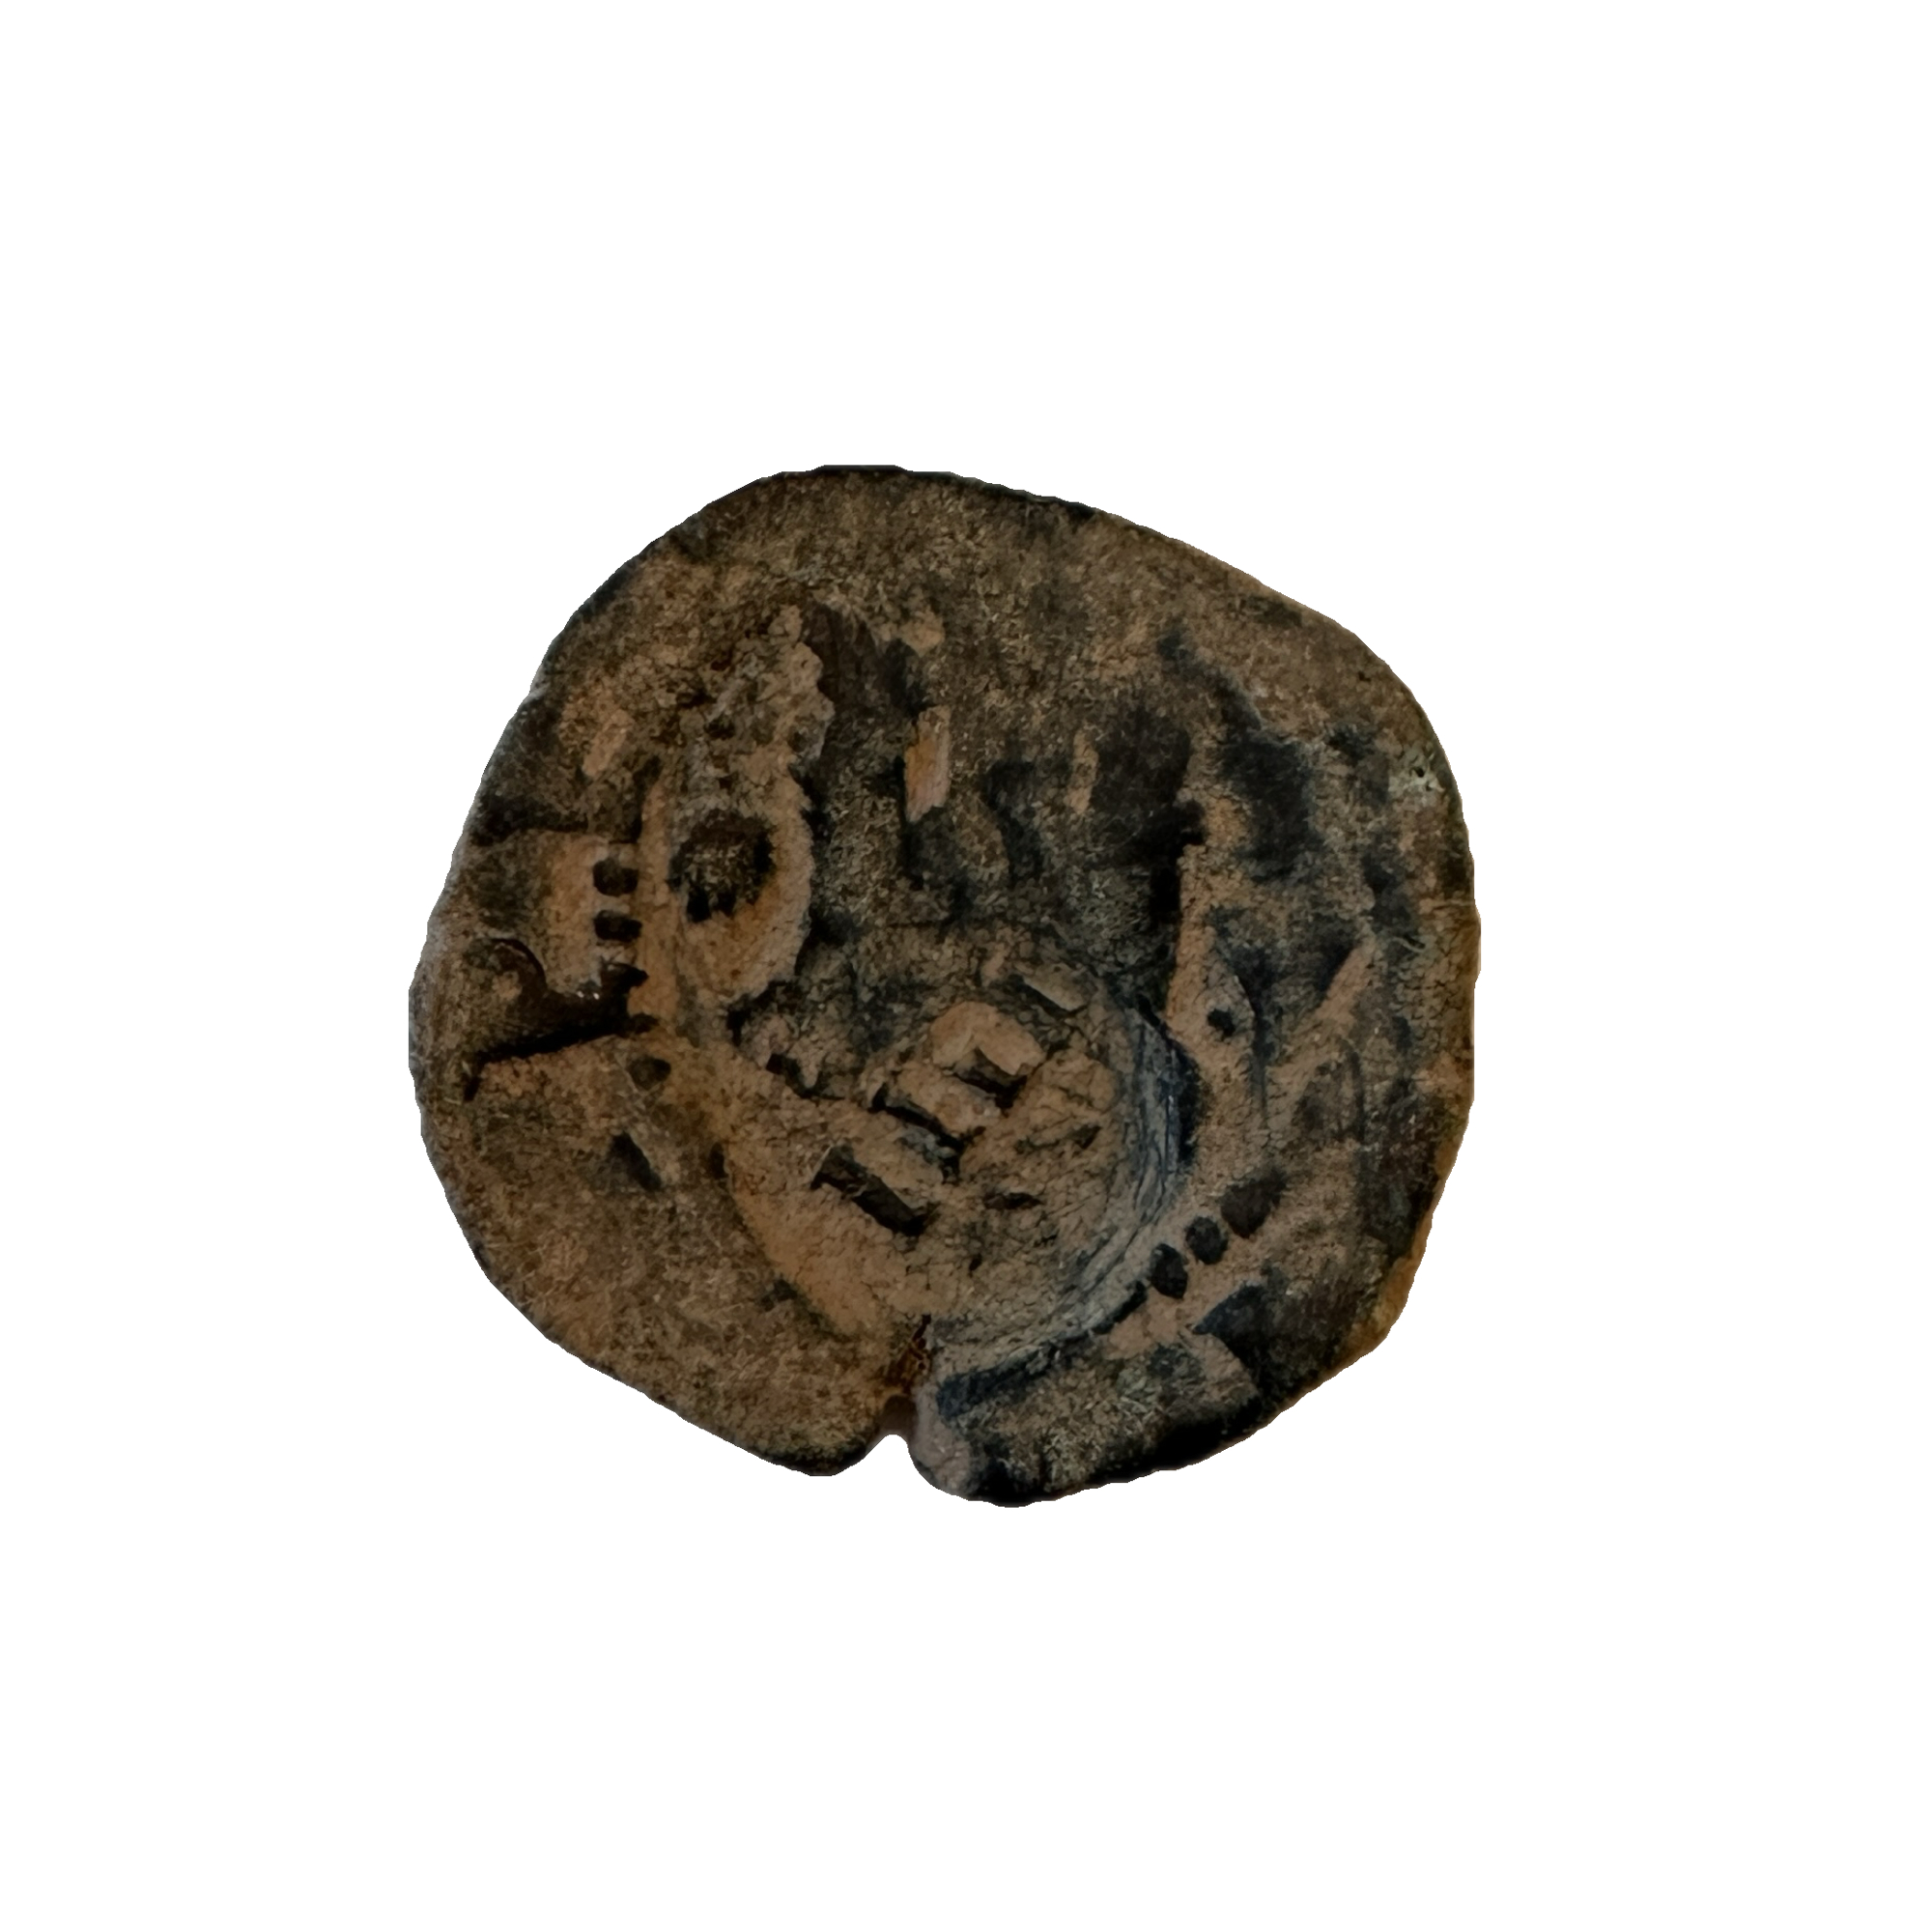 Pirate coin from spain. 1600s bronze cob with great oxidation. Wonderful detail for old treasure